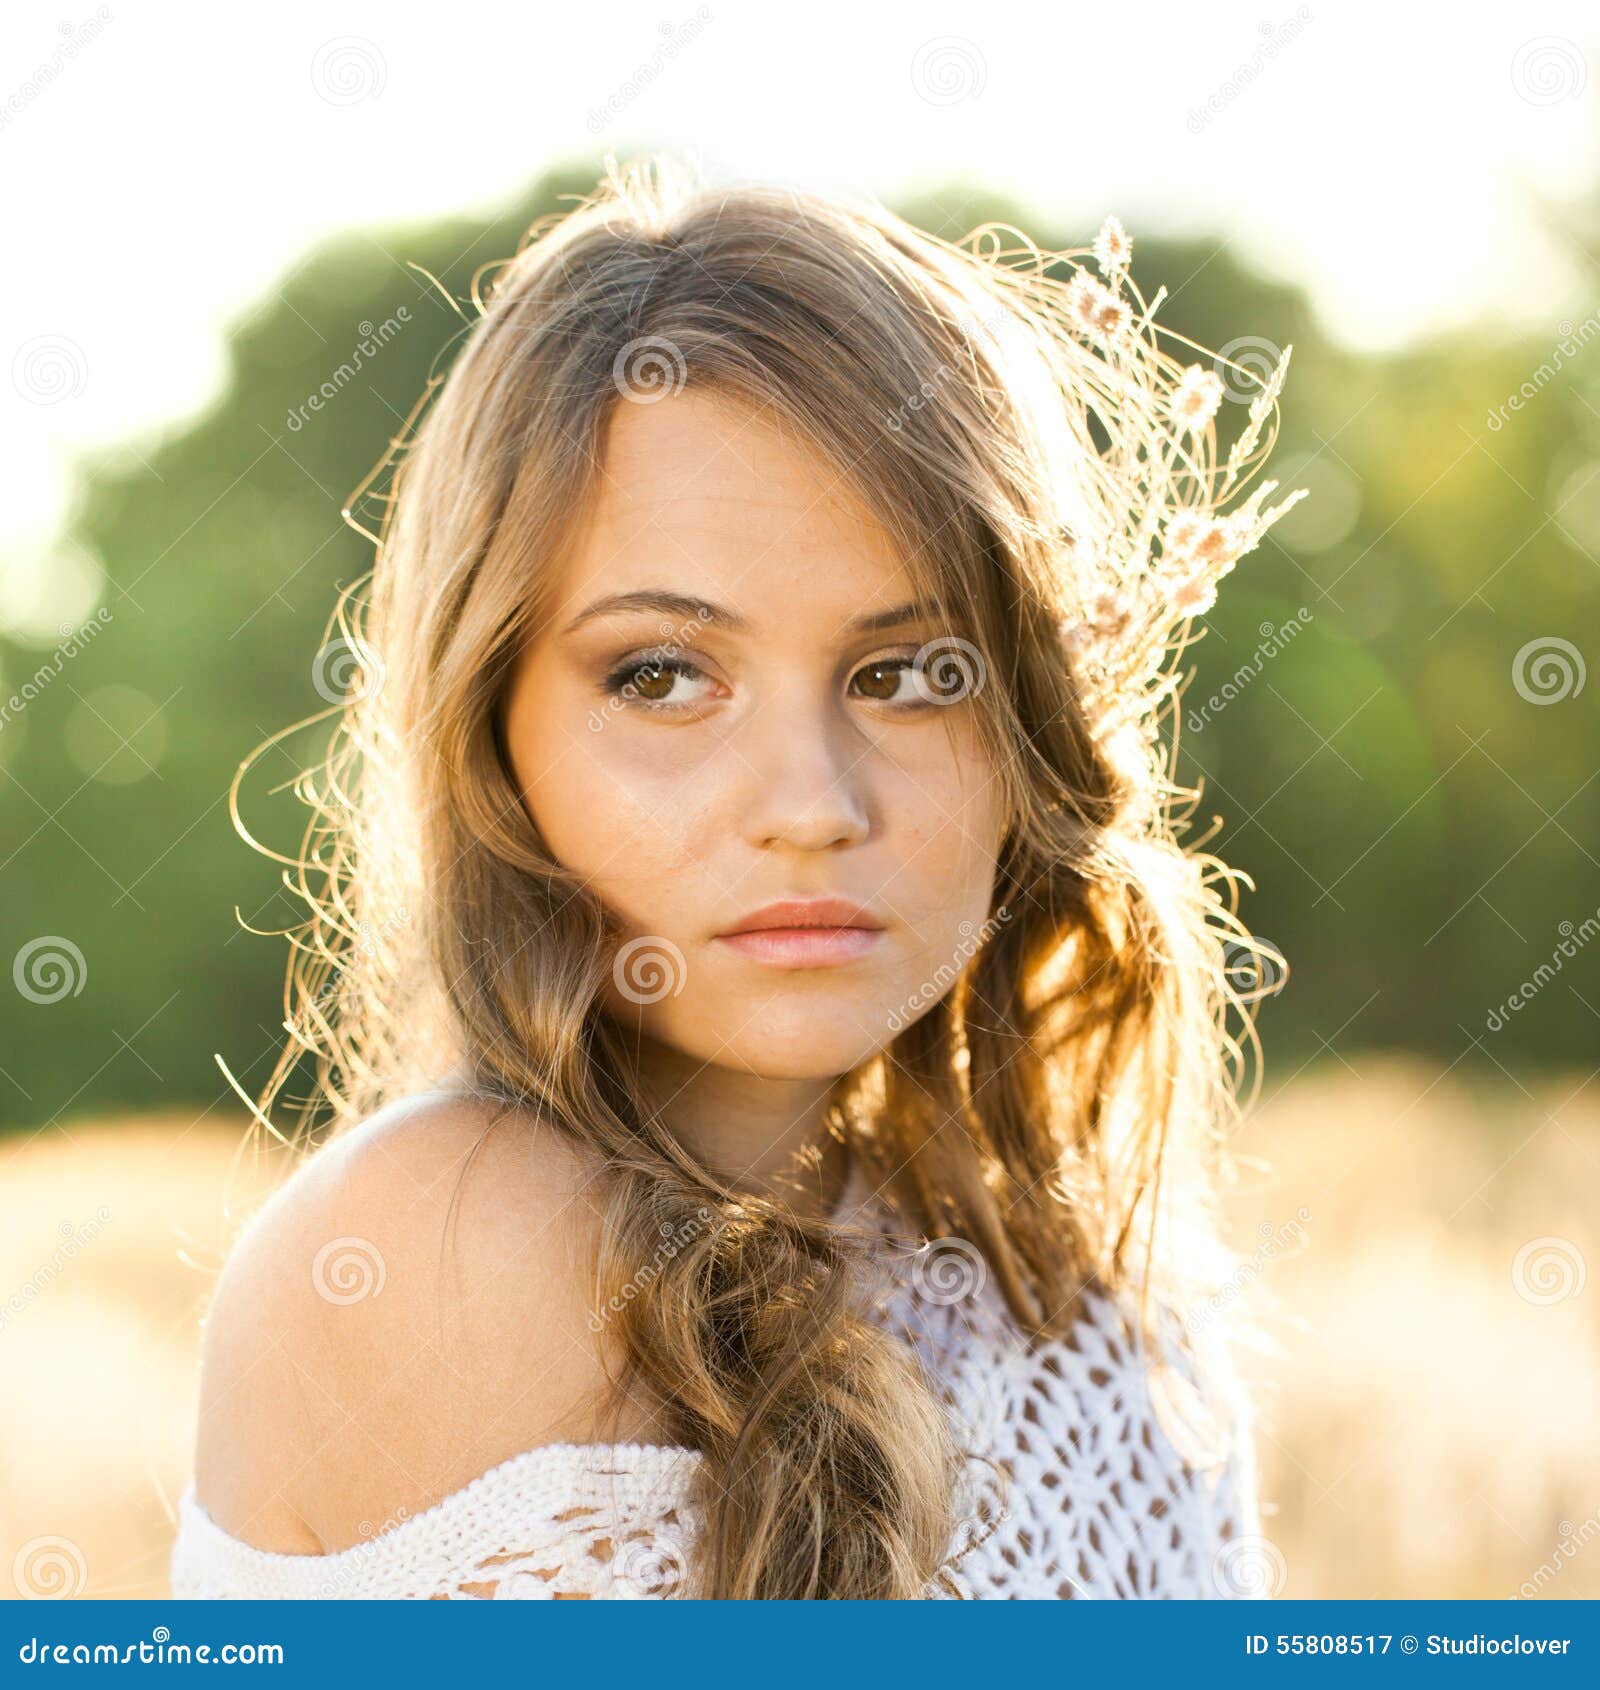 Beautiful Lady Model in Field at Sunrise - Outdoors Shot Stock Image ...